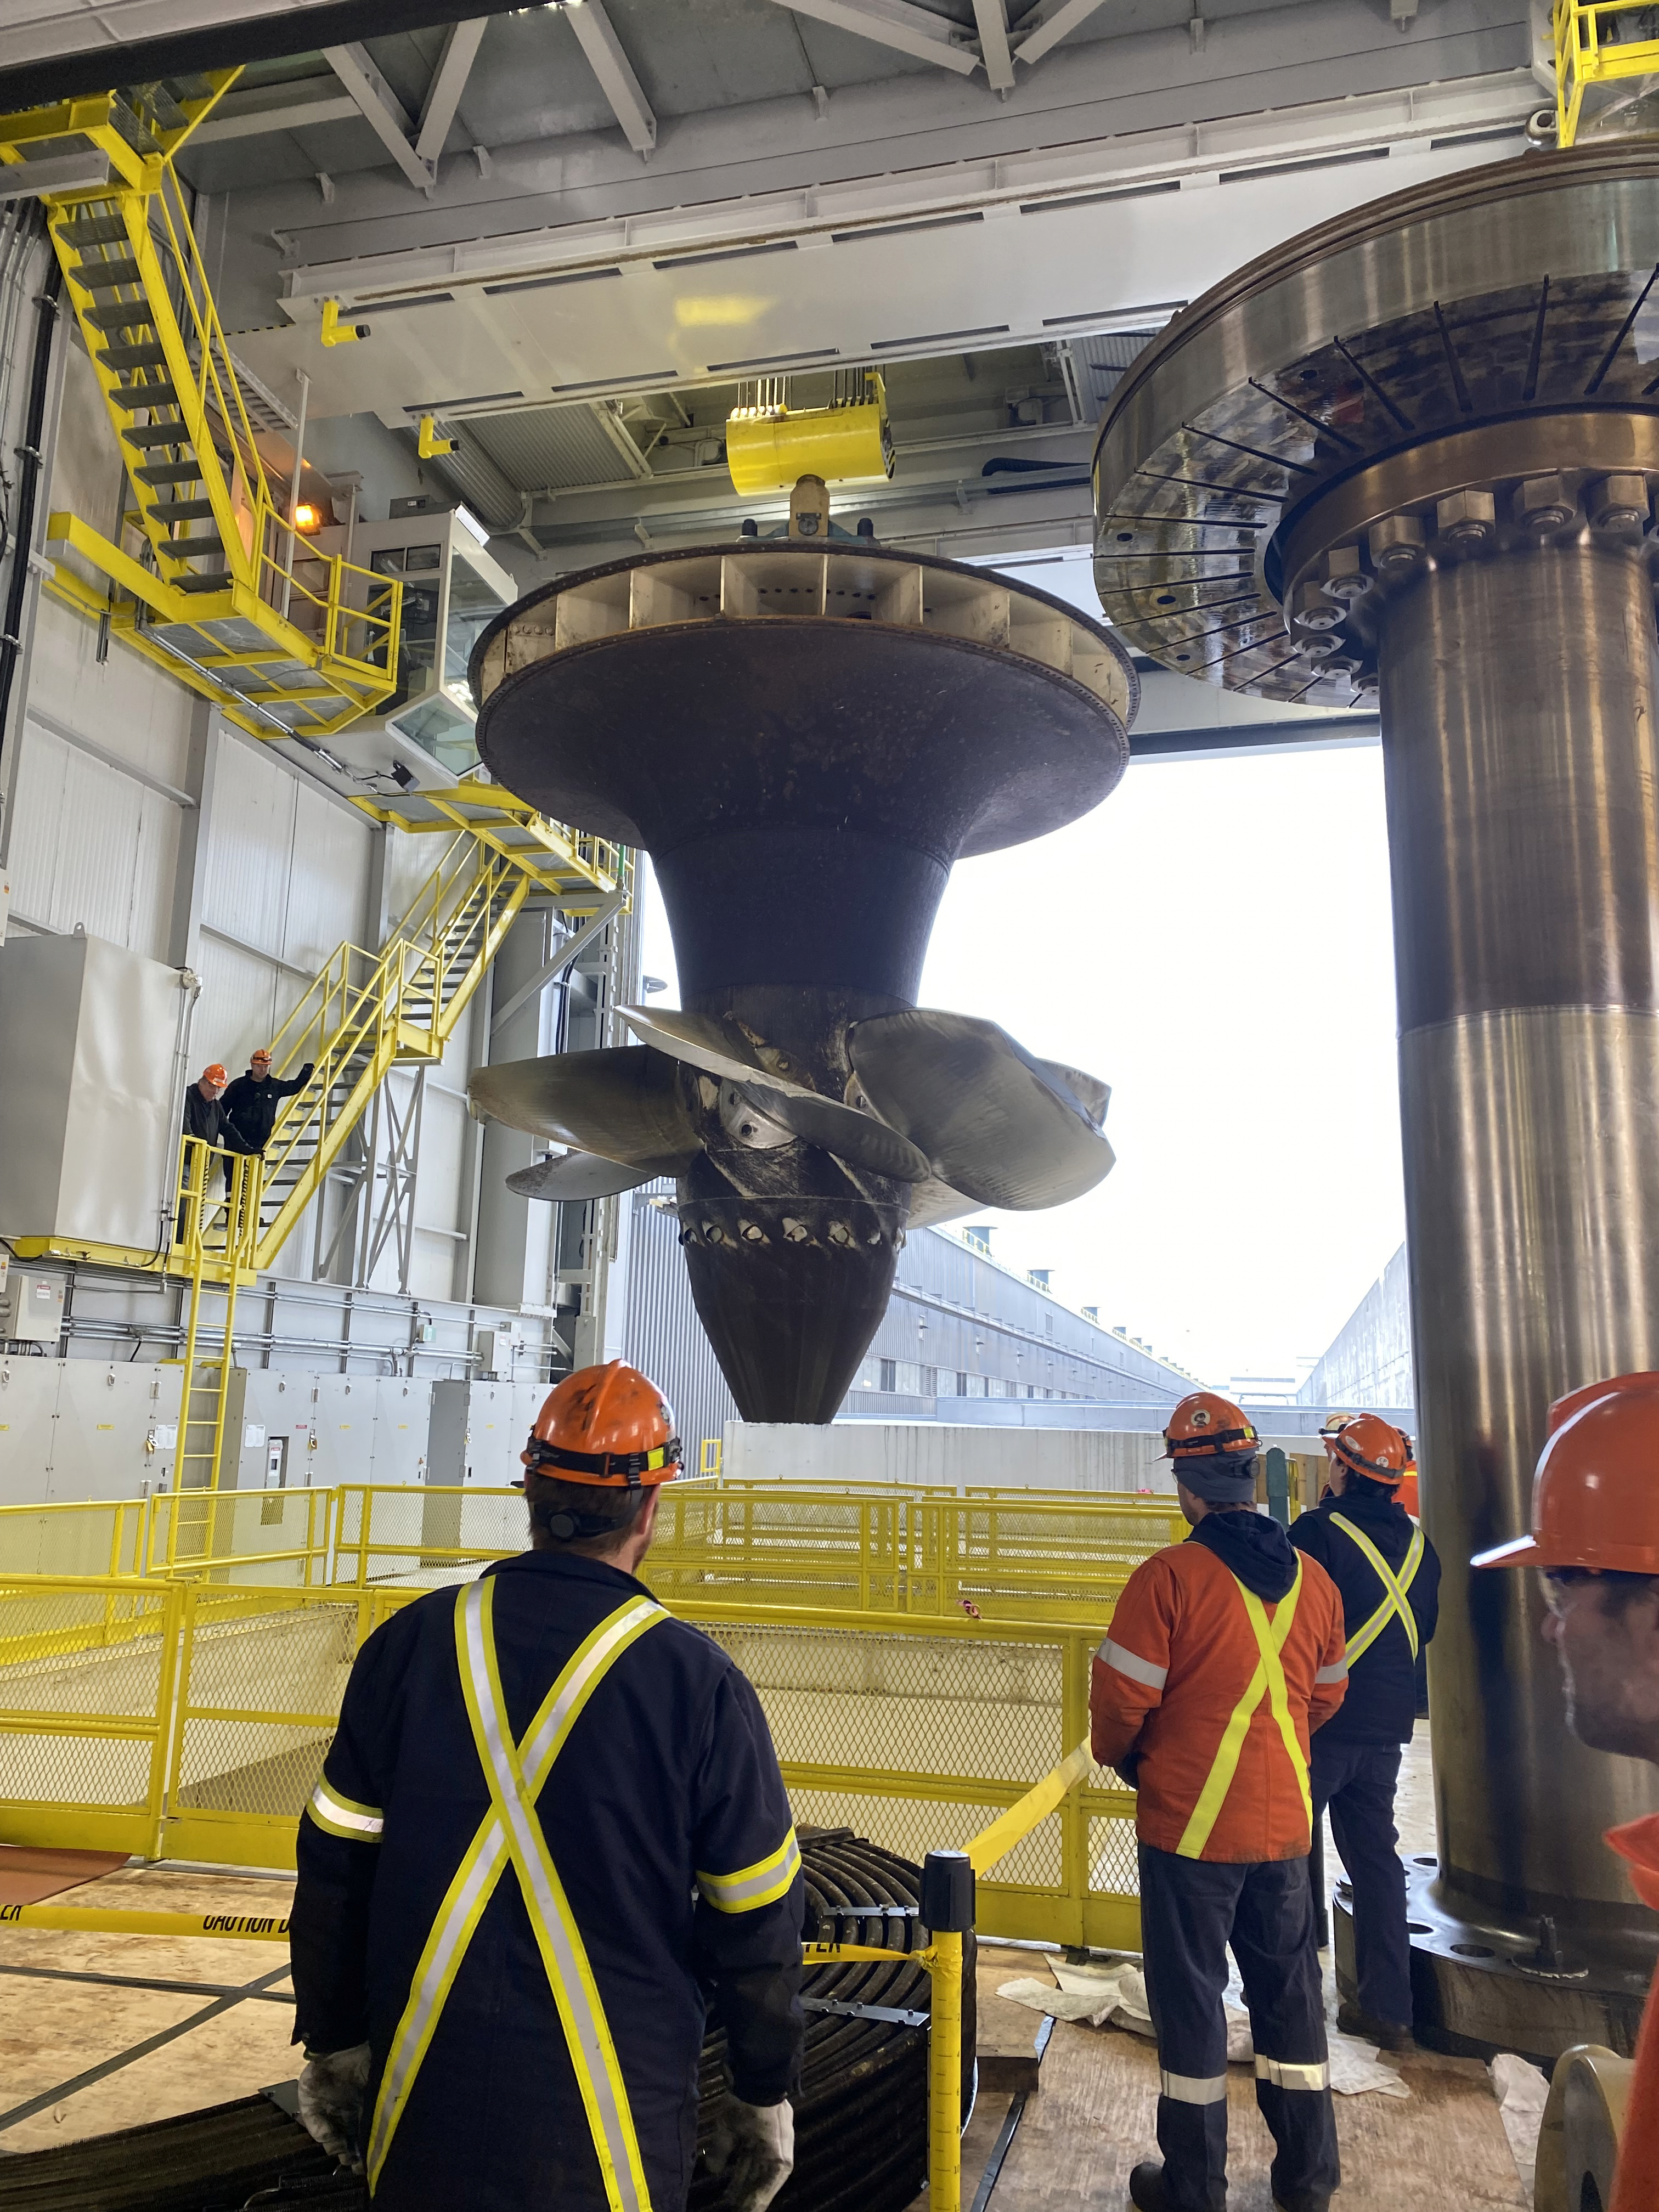 The massive turbine runner is pulled up from R.H. Saunders GS's Unit 9, which is undergoing an overhaul.